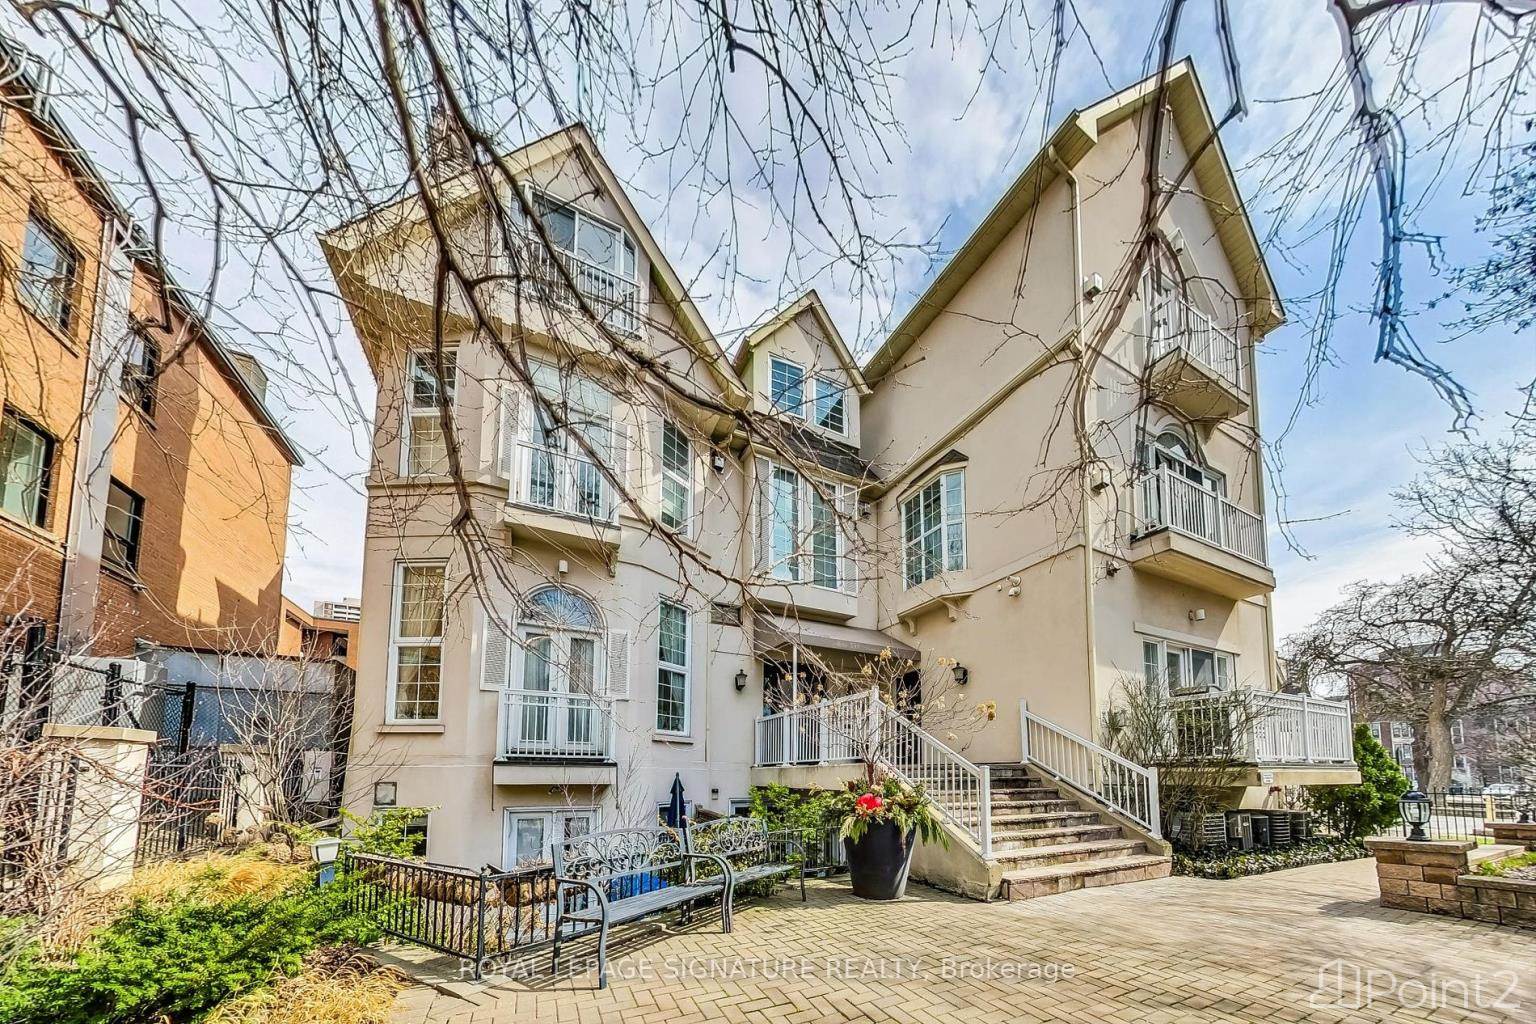 Residential Home For Sale |  | Toronto | M4Y2H7